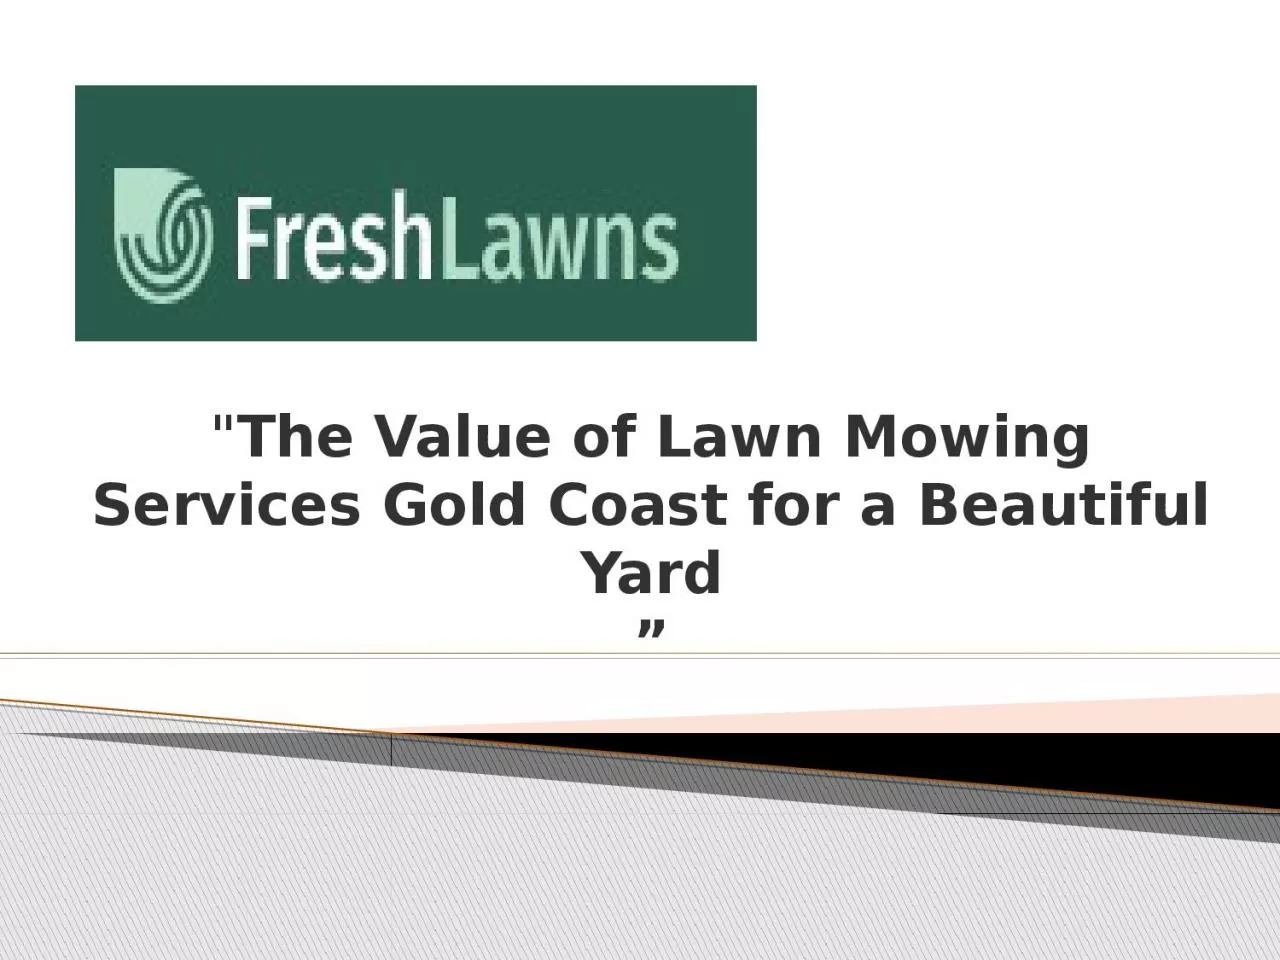 The Value of Lawn Mowing Services Gold Coast for a Beautiful Yard